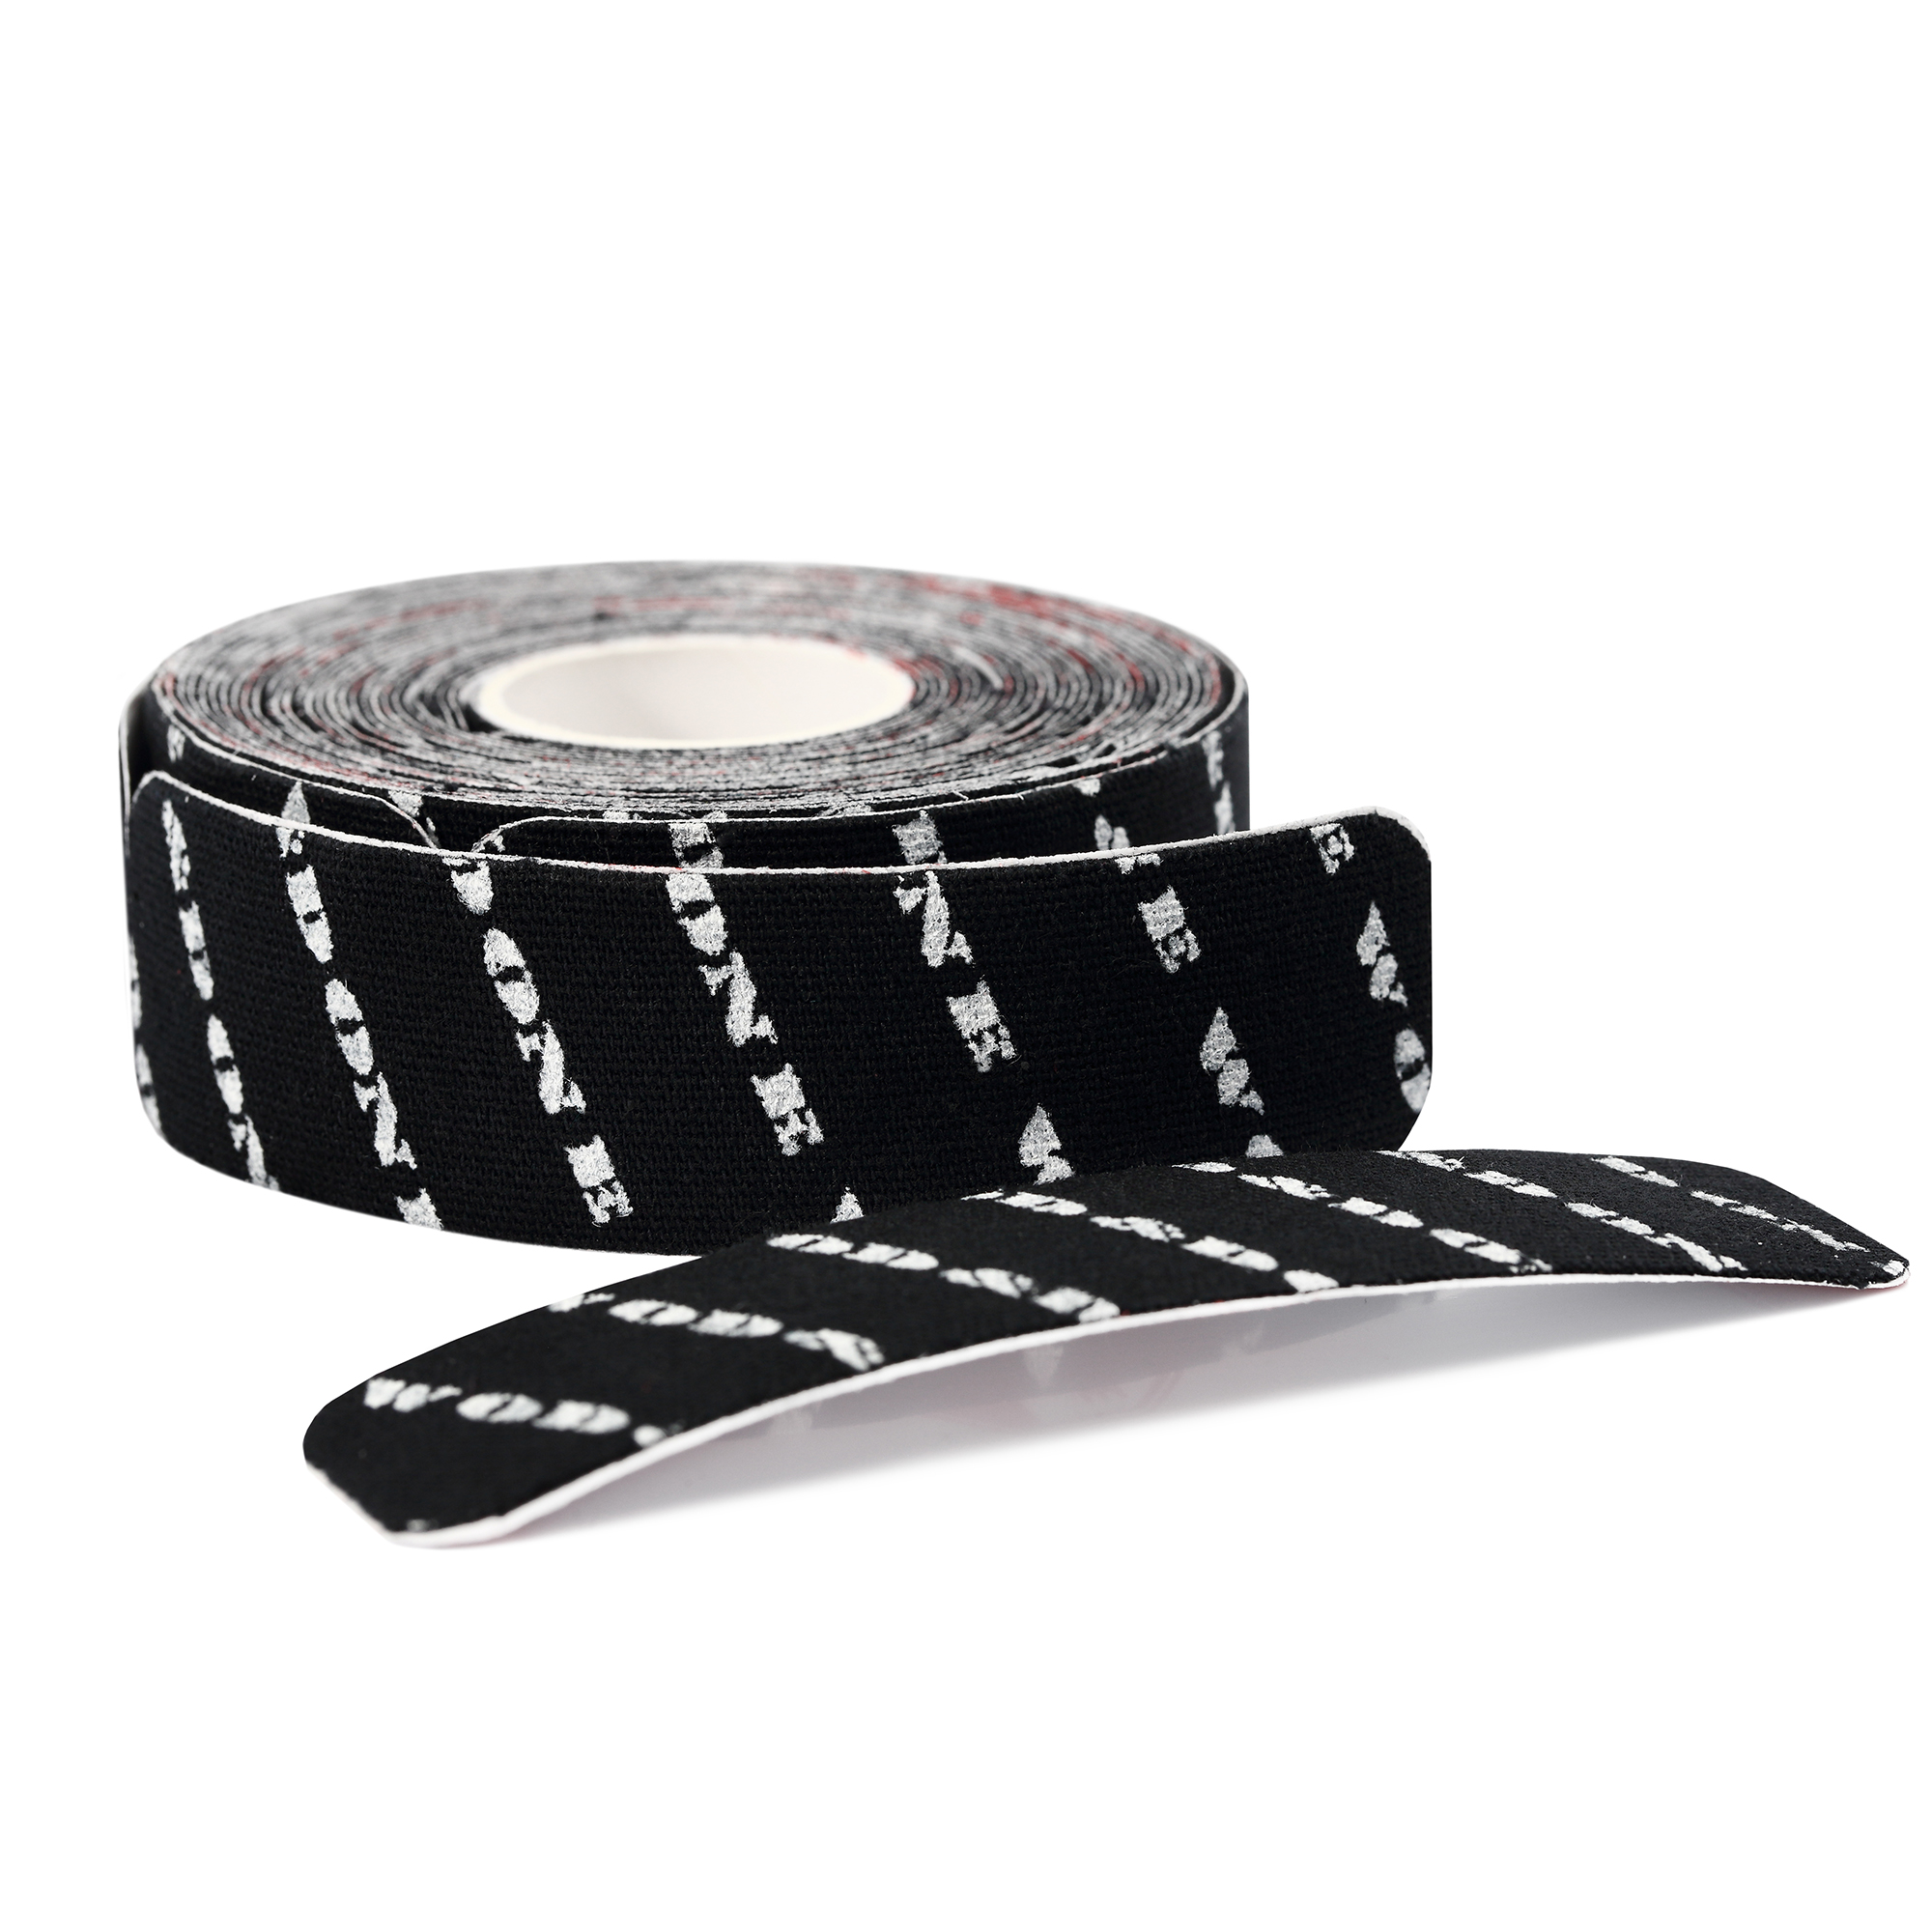 Precut Thumb Protection Tape Strips in a Roll (32 or 40 strips) – WOD & DONE